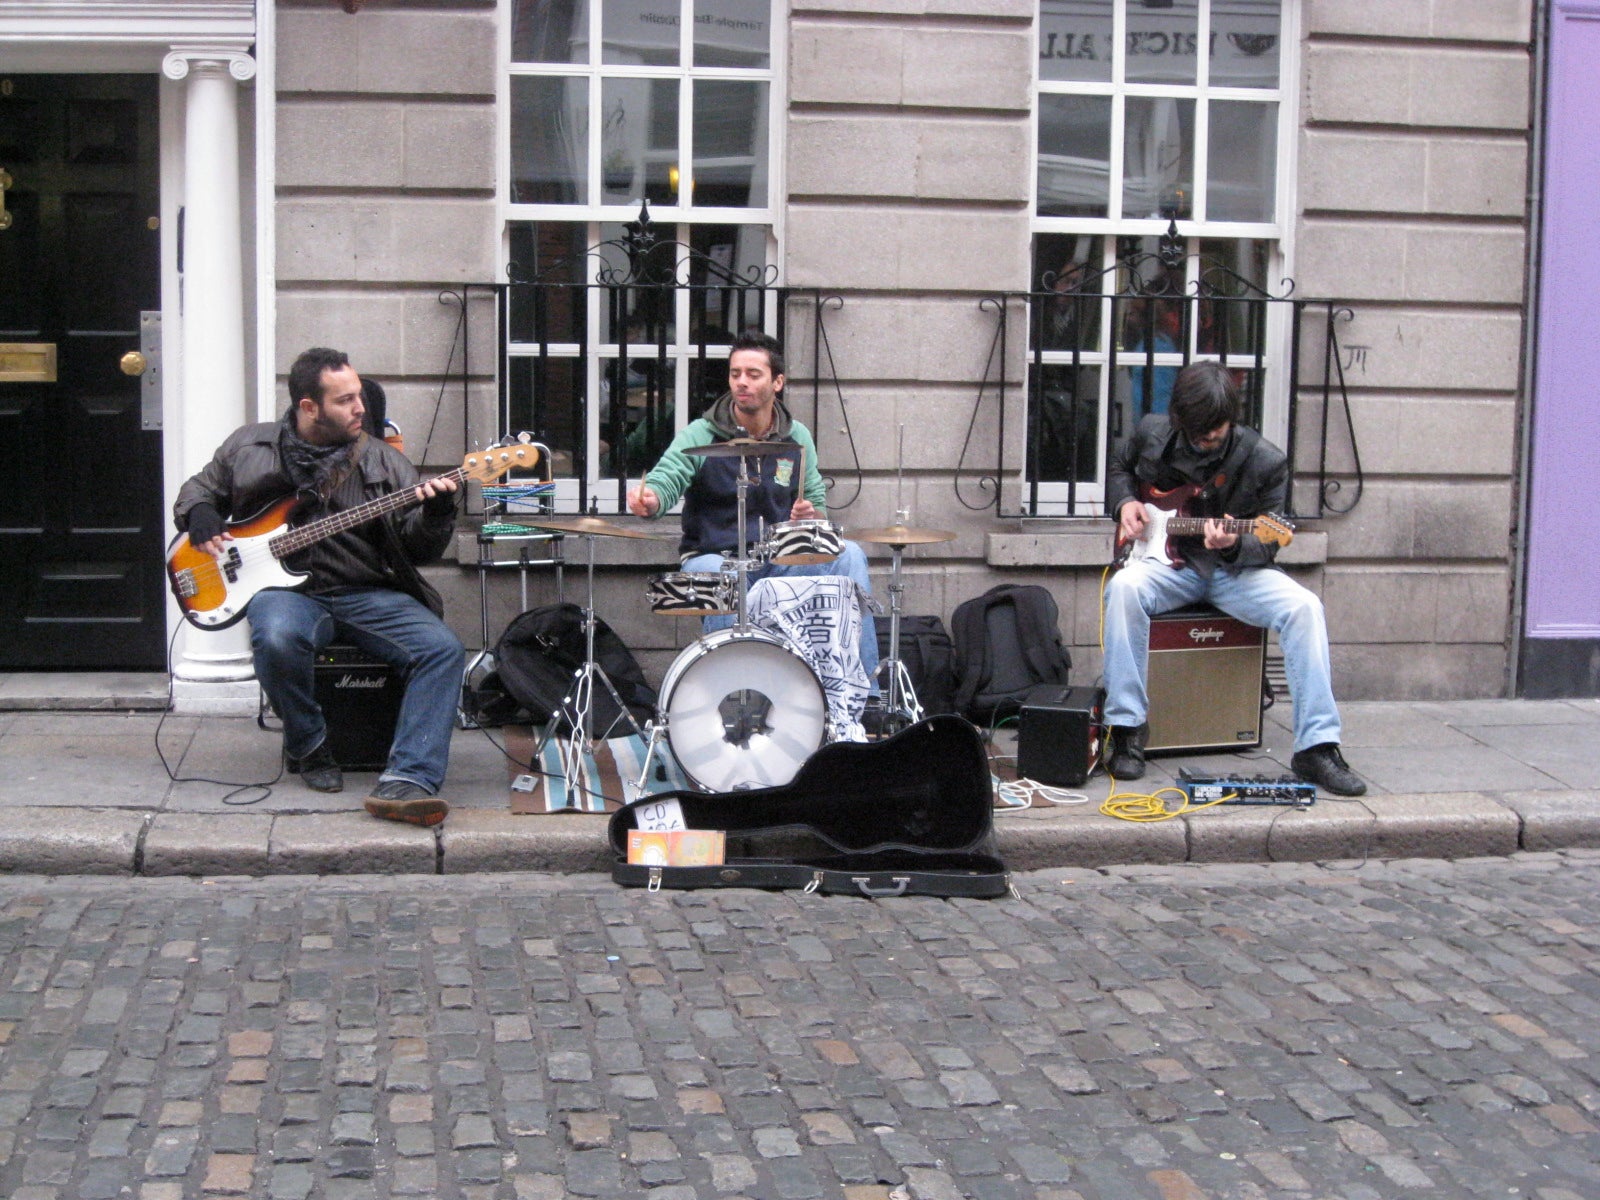 Street musicians in Temple Bar - a common sight on any day of the week